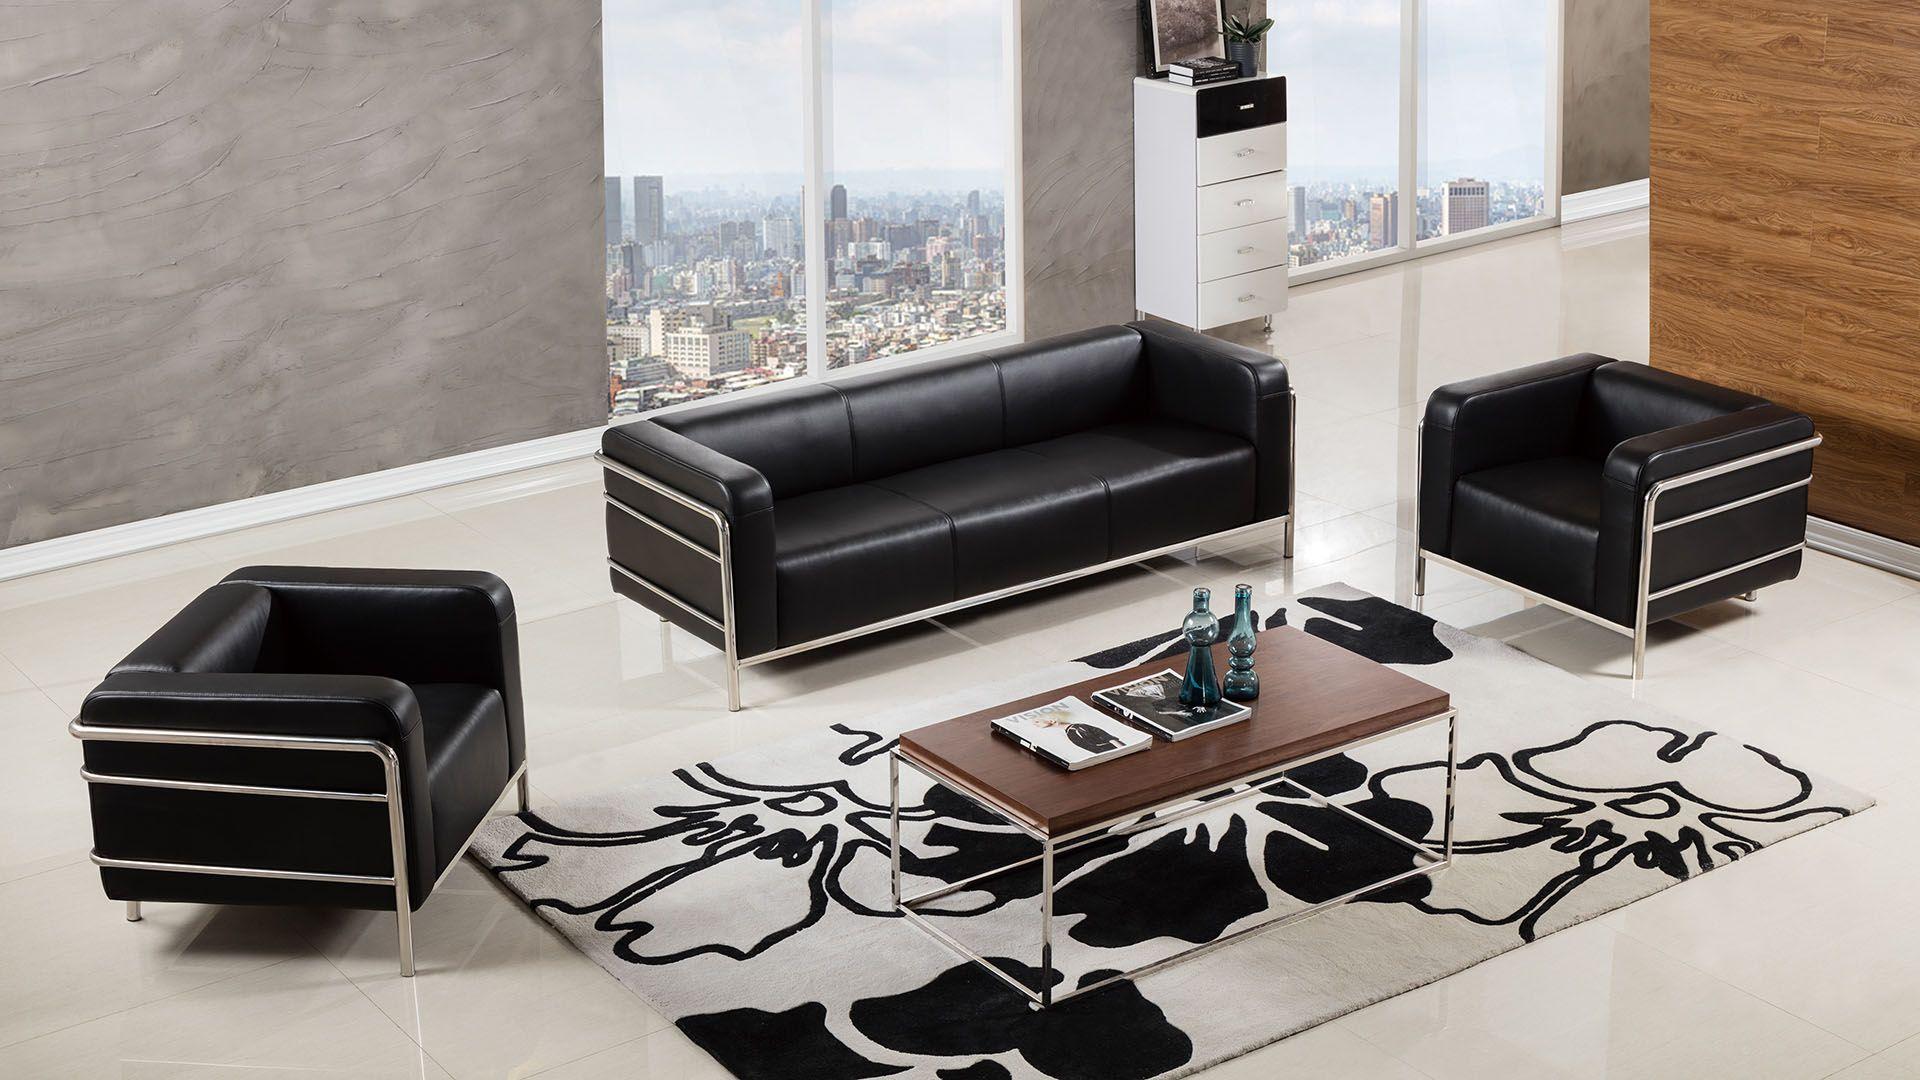 Contemporary, Modern Conference Sofa Set 822 822 in Black Bonded Leather